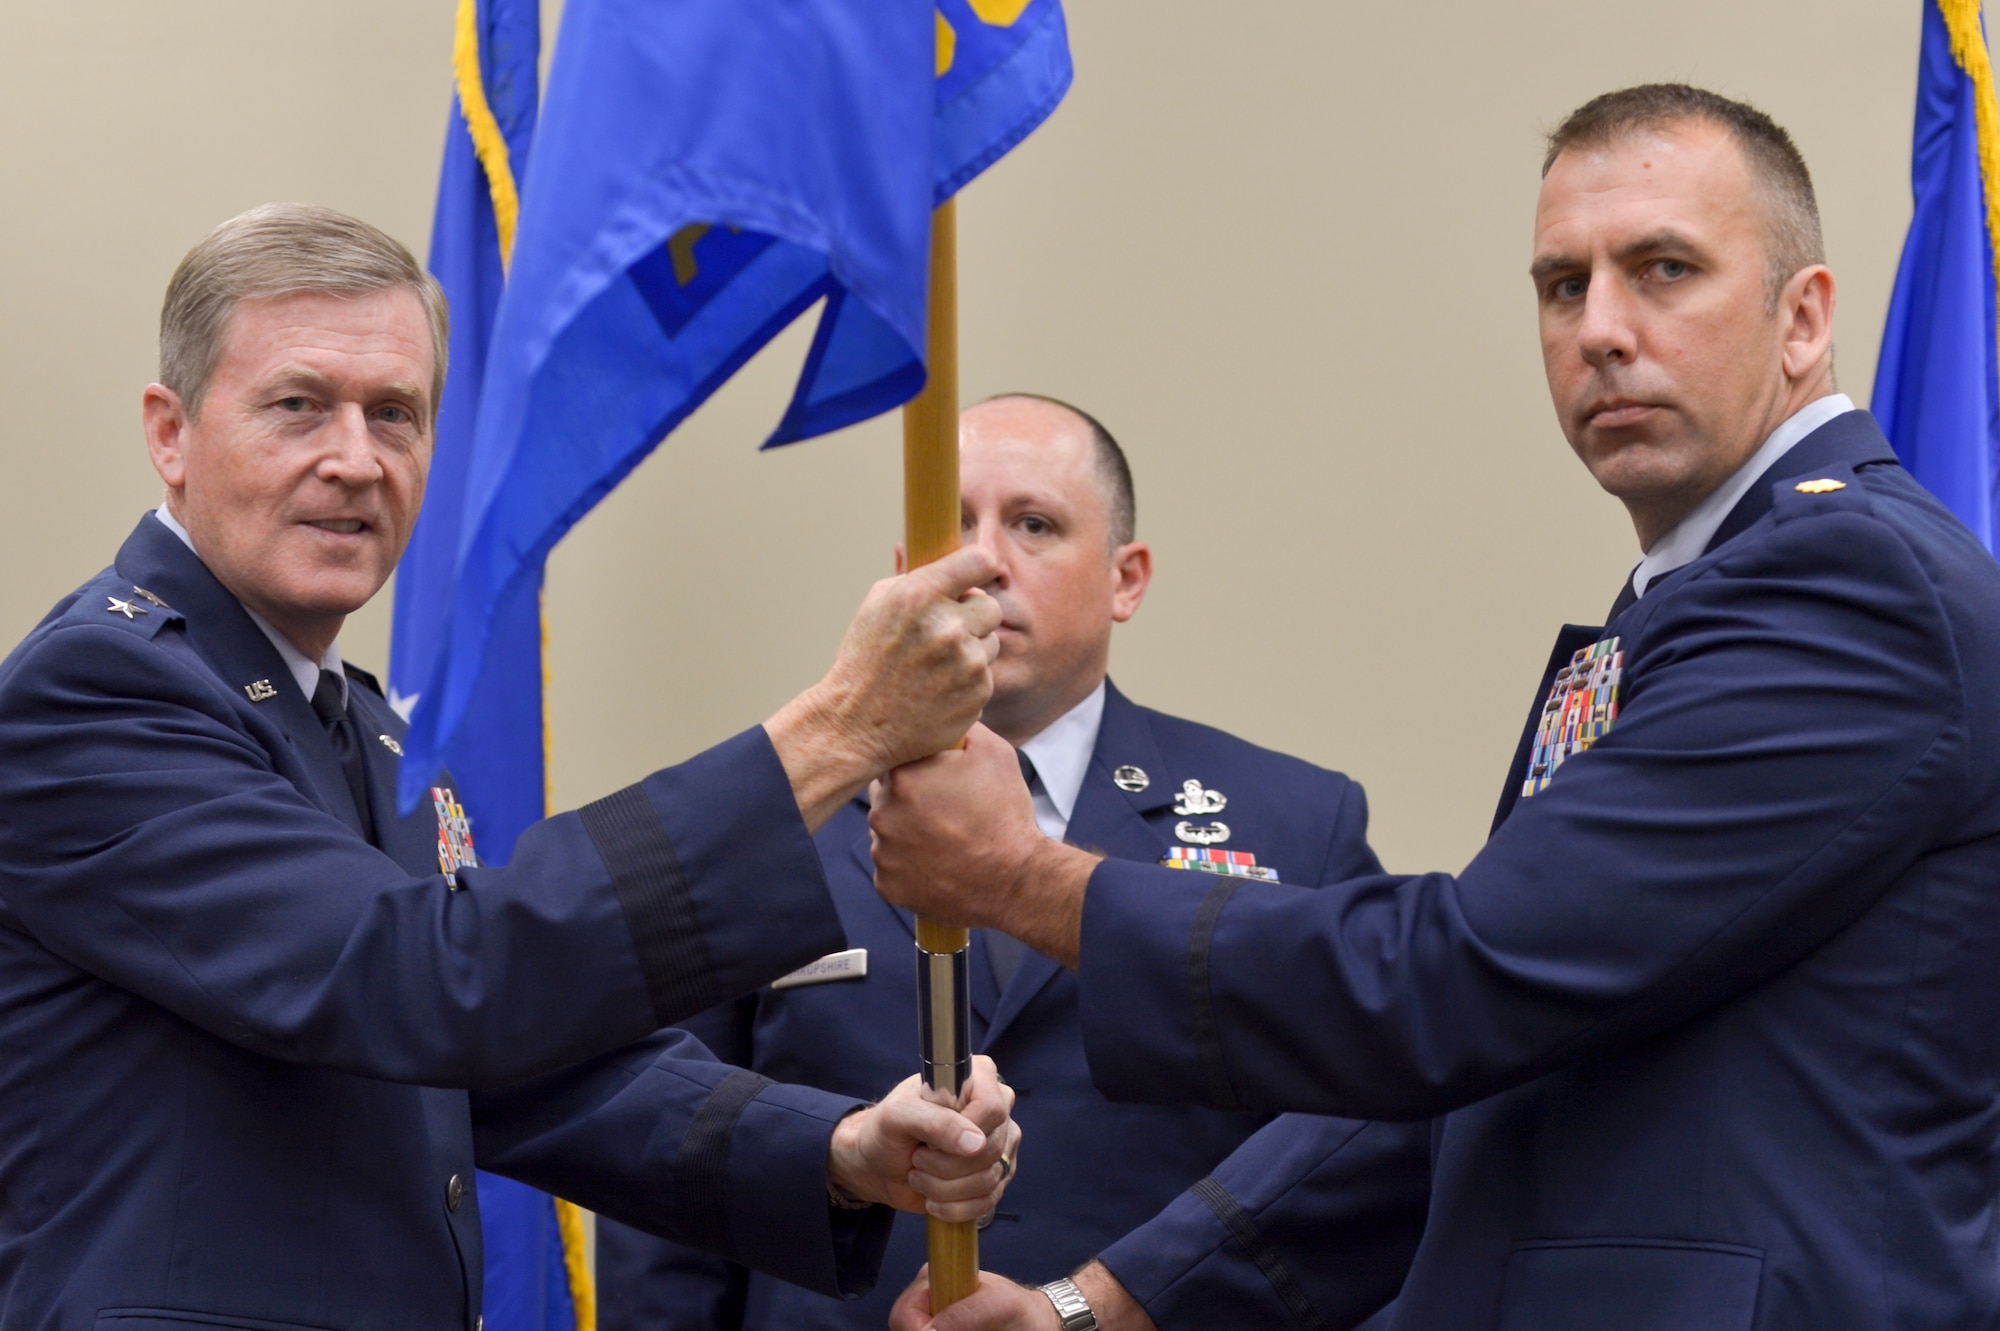 Air Force Maj. Christopher D. Gries accepts command of the 146th Air Support Operations Squadron from Air Force Maj. Gen. Gregory L. Ferguson, AFSOC mobilization assistant to the commander, August 2, 2015, Will Rogers Air National Guard Base. The 146 ASOS held a joint ceremony honoring Lt. Col. Waltermire and welcoming Air Force Maj. Christopher D. Gries as the new squardron commander. (U.S. Air National Guard photo by Tech. Sgt. Caroline Essex/Released)